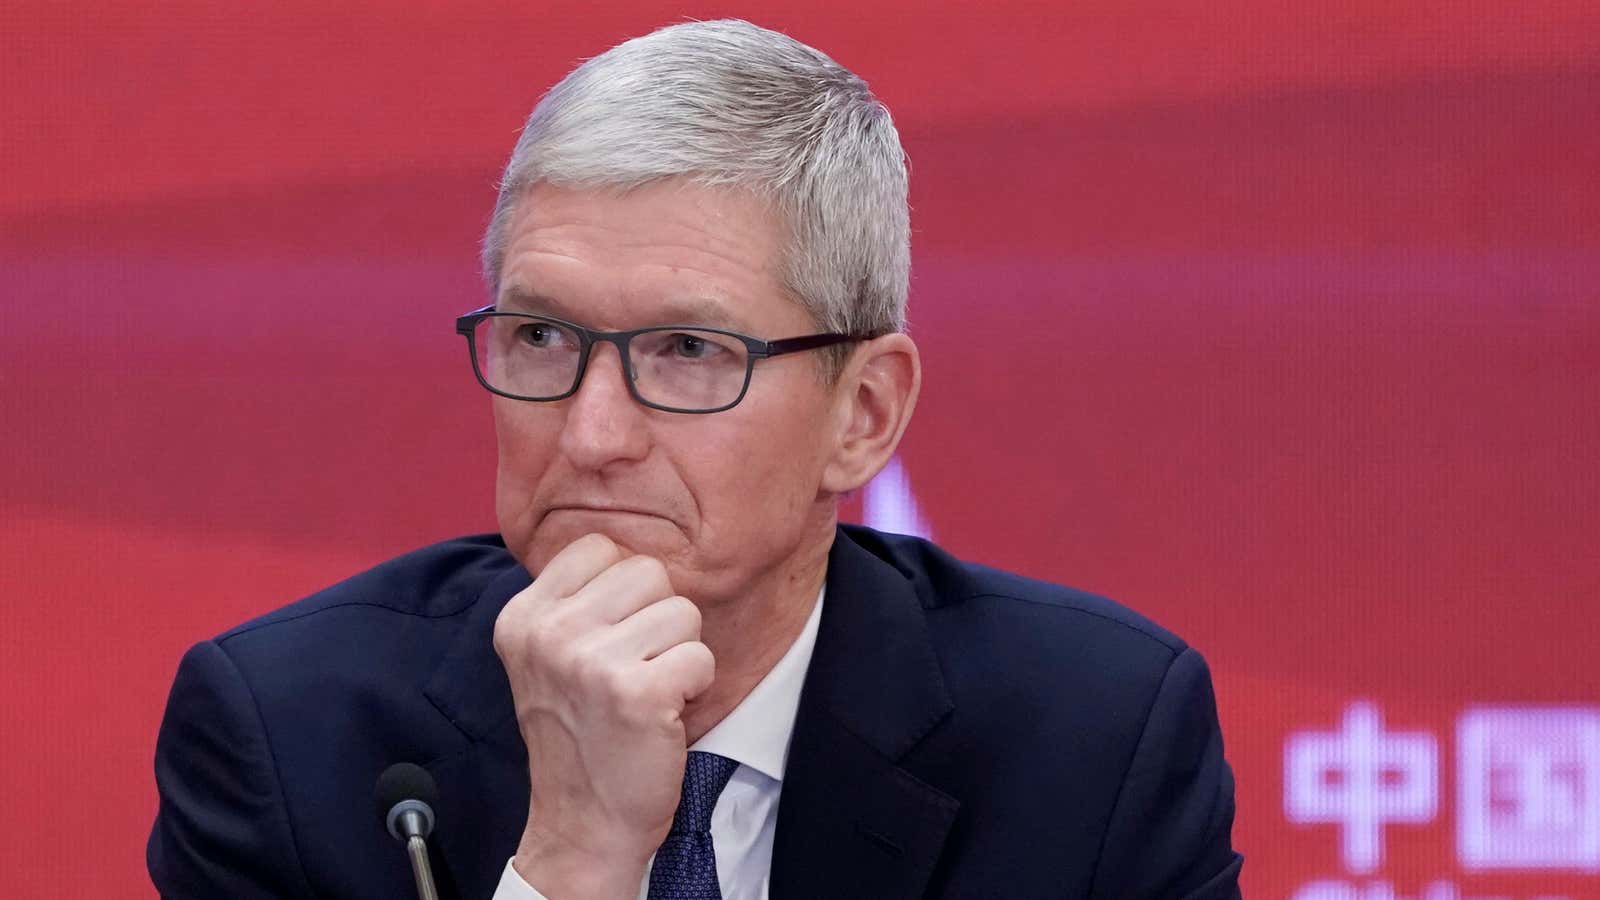 Sure, Tim Cook is the CEO of Apple. But could he have broken through the ceiling in Britain?